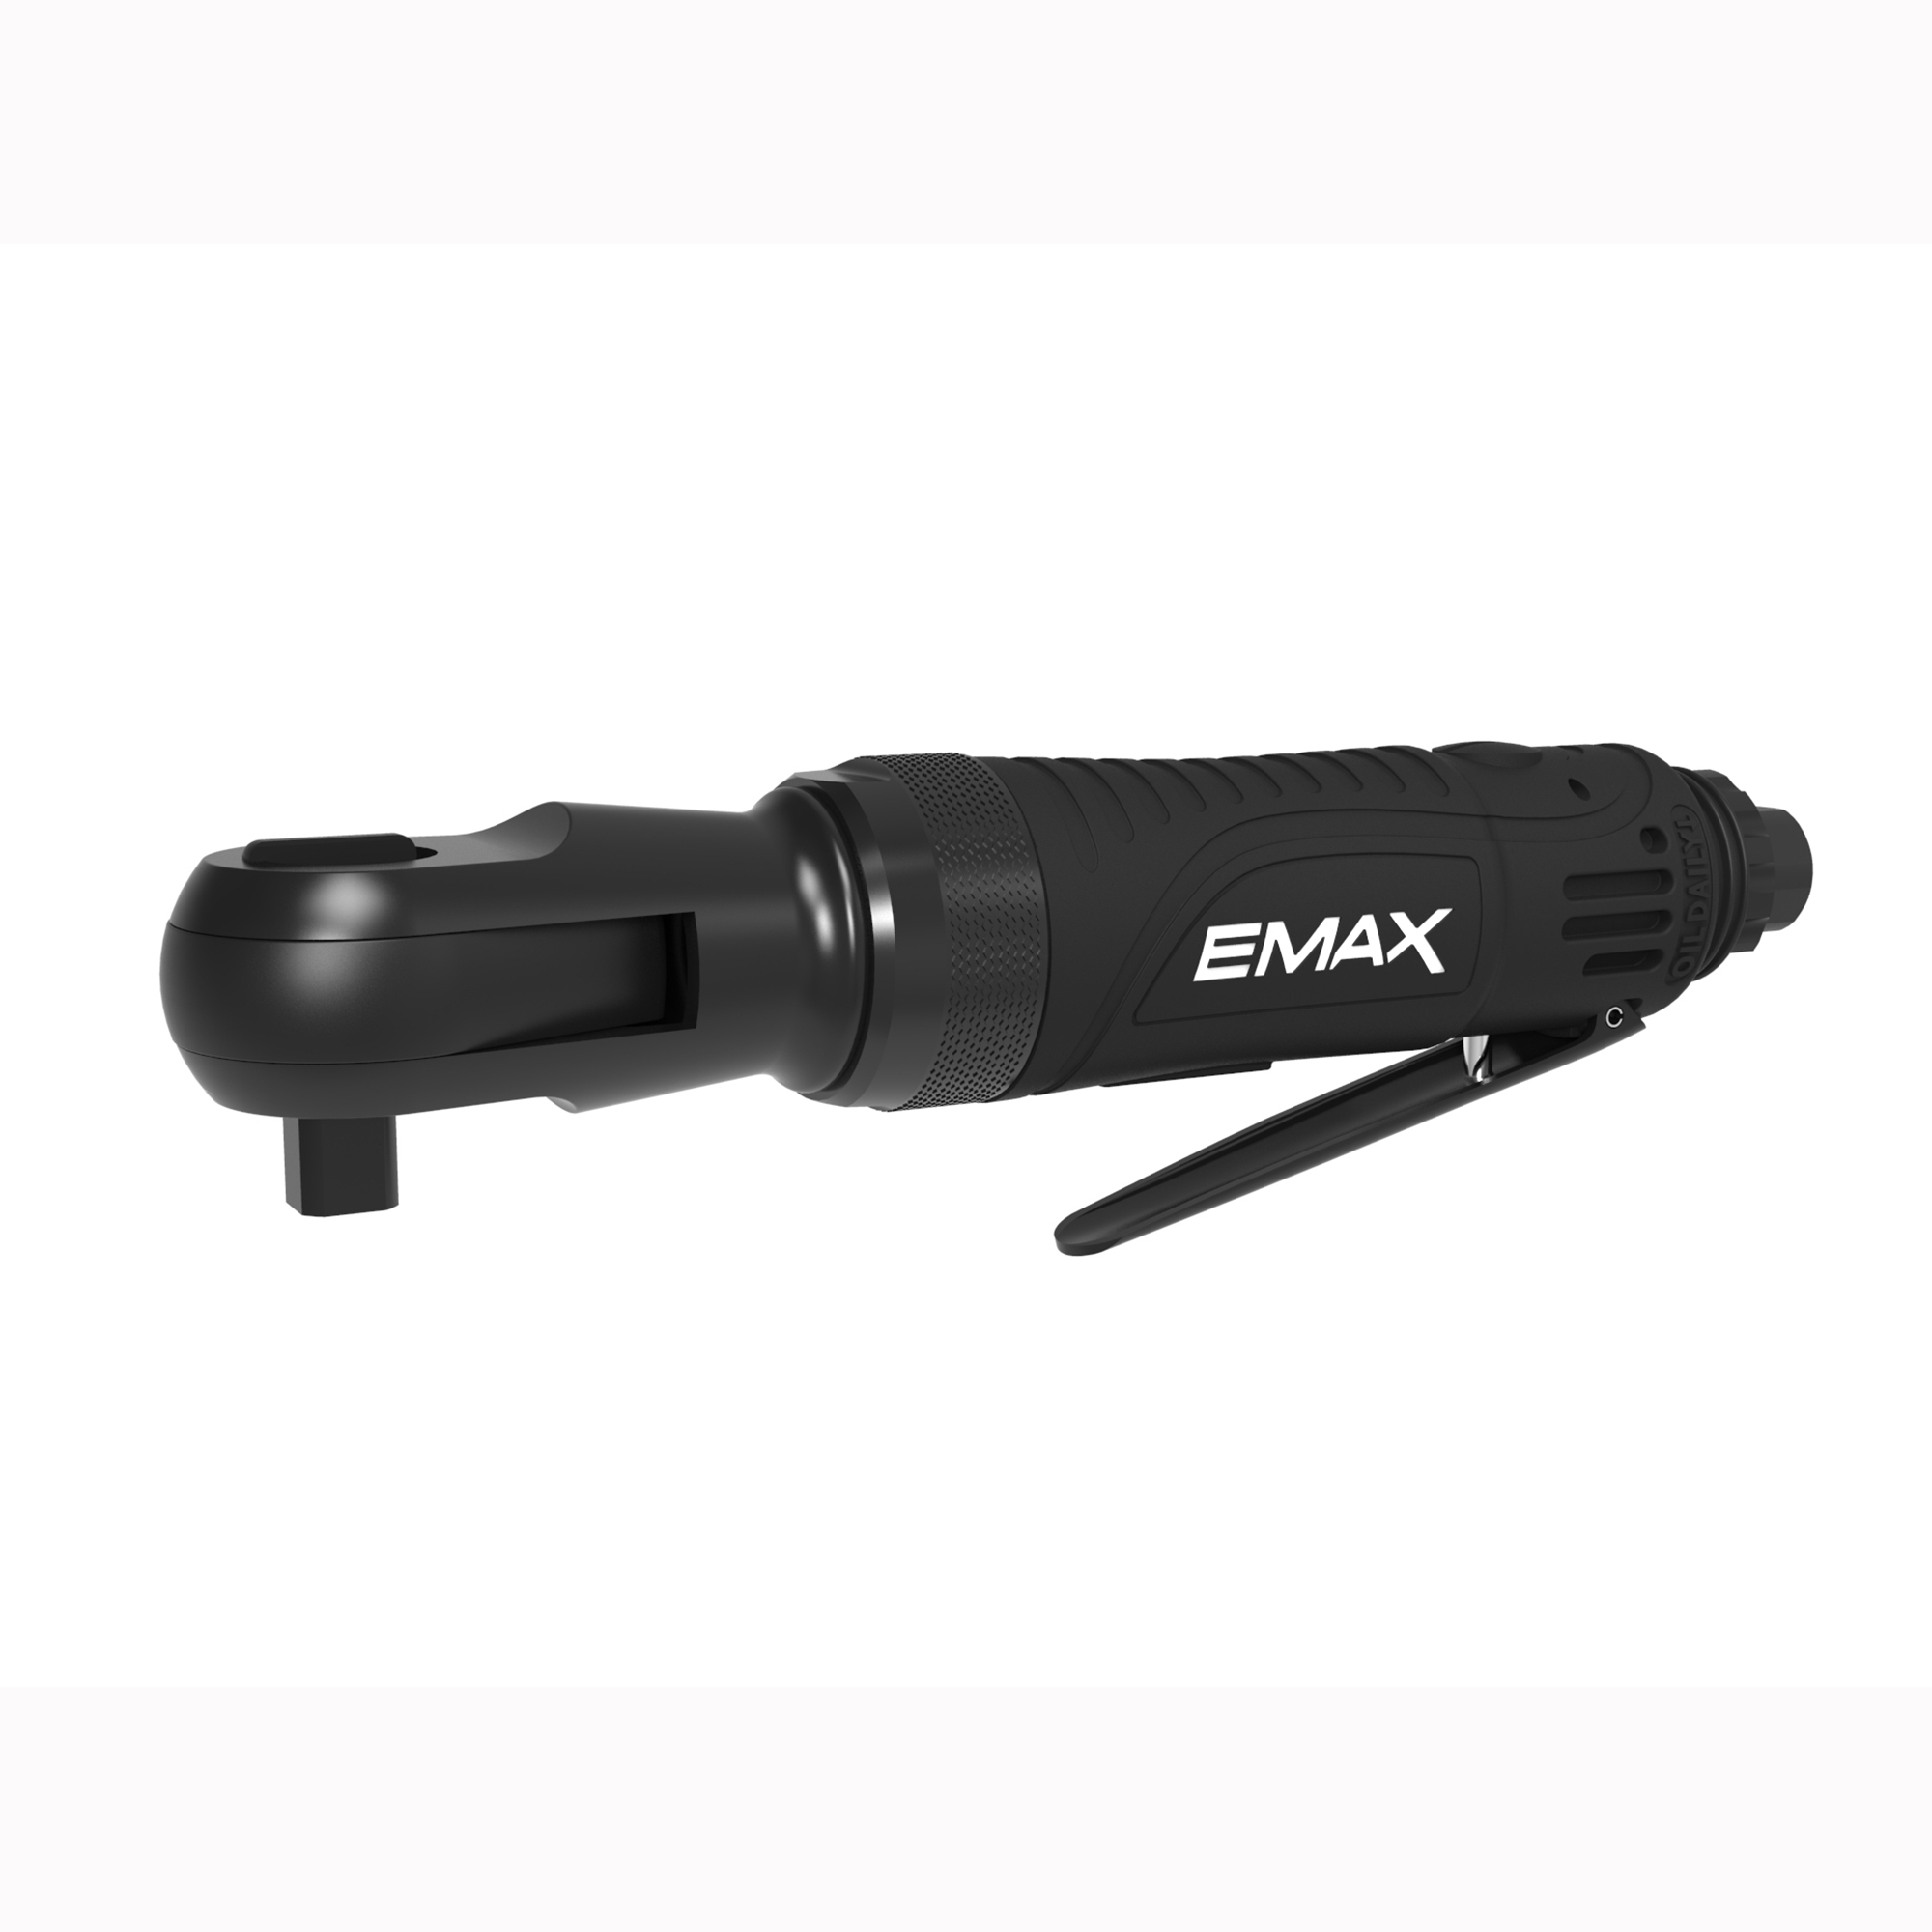 Emax, Composite 1/2Inch Air Ratchet Wrench, Drive Size 1/2 in, Max. Torque 60 ft-lbs., Model EATRT05S1P